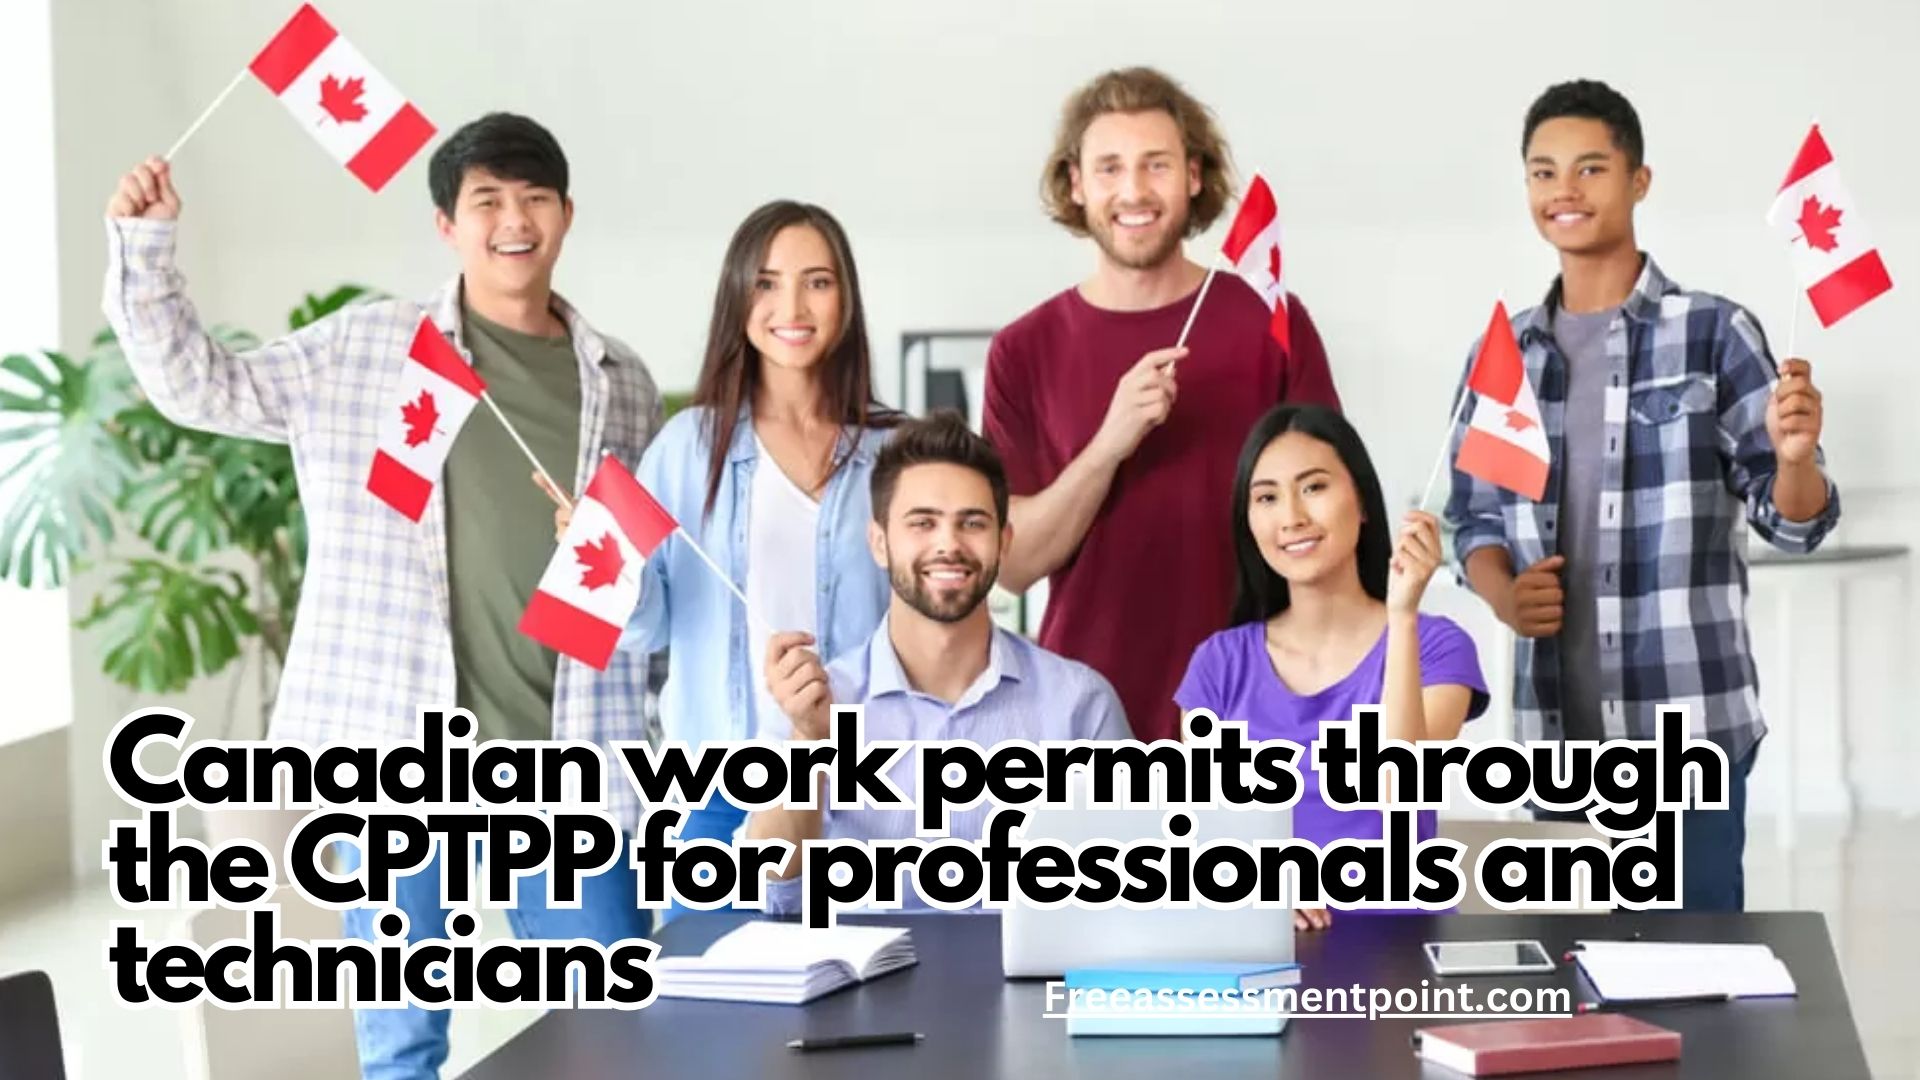 Canadian work permits through the CPTPP for professionals and technicians